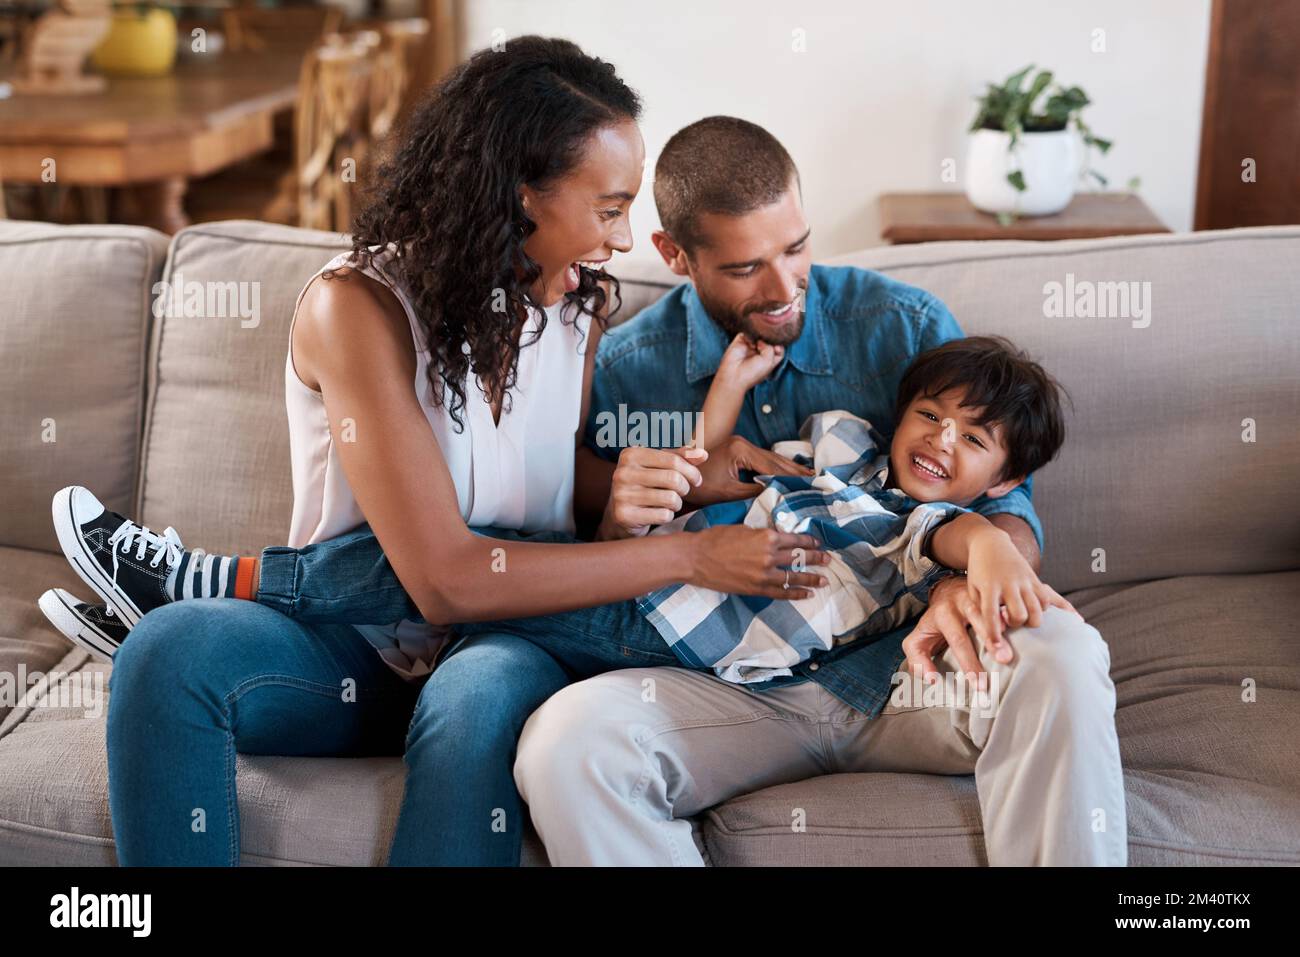 We love seeing him happy. a young boy being tickled by his parents. Stock Photo